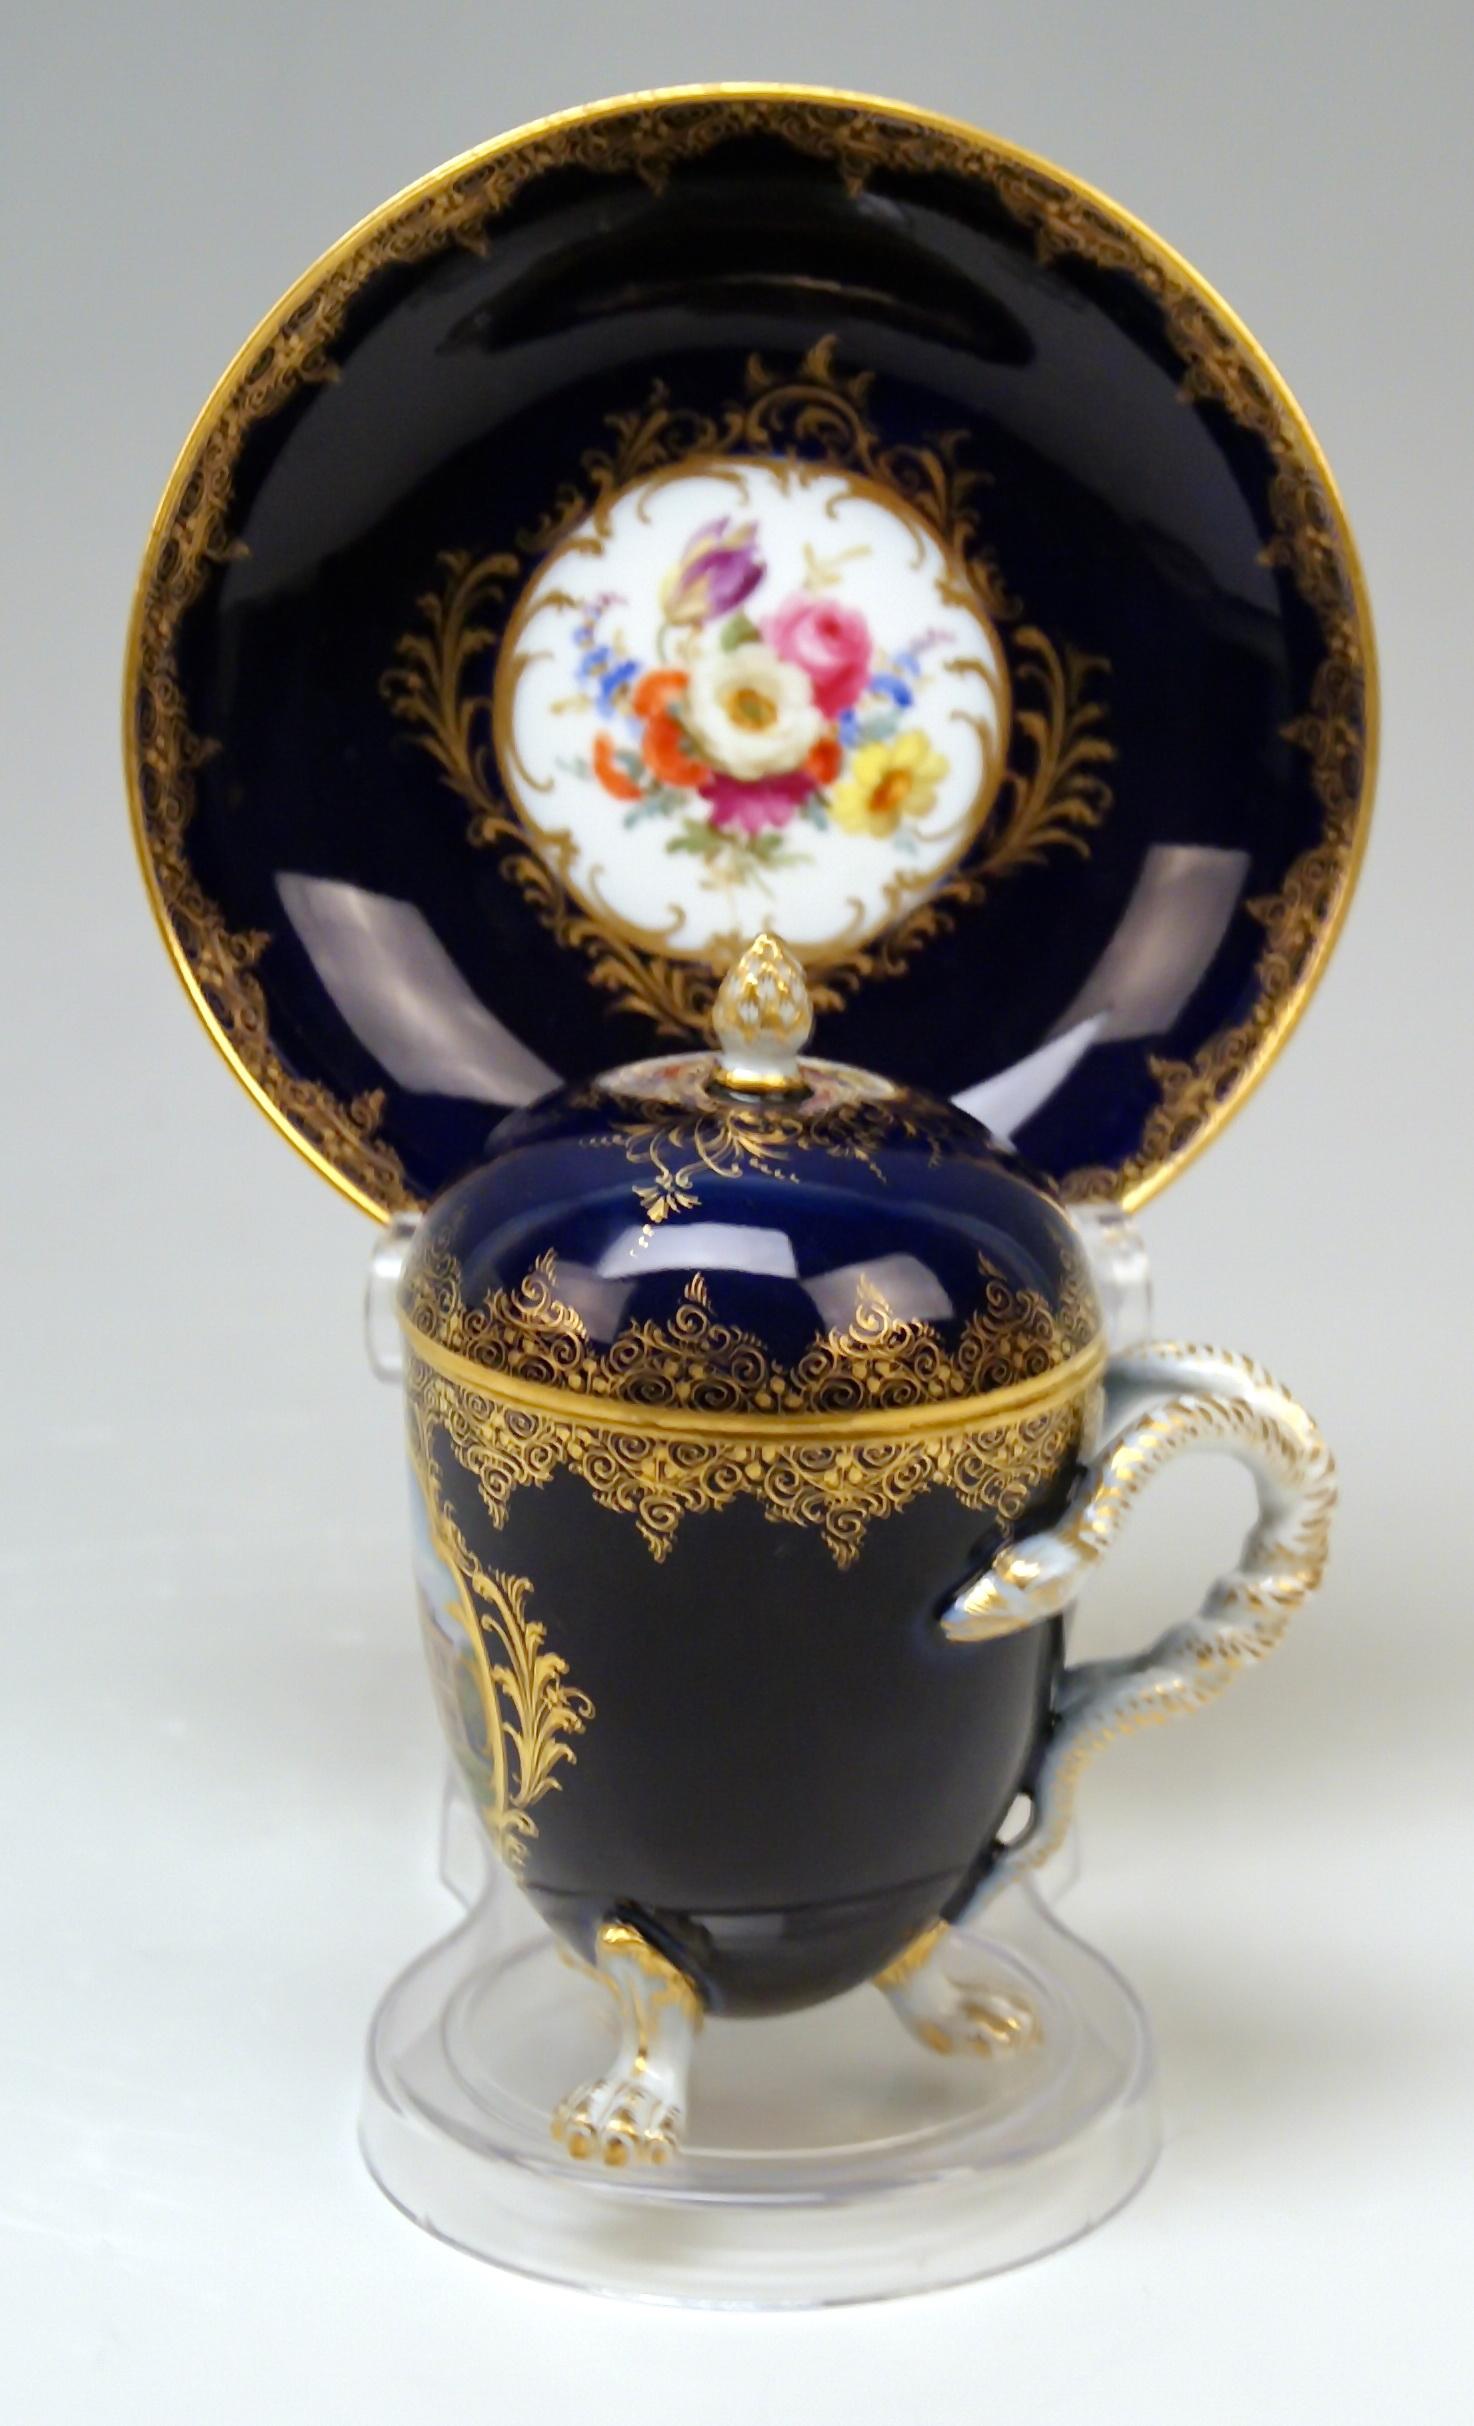 Meissen nicest egg cup and saucer, abundantly painted (= decorated with view of castle as well as with flowers)

Manufactory: Meissen
Dating: made during 19th century (circa 1860-1870)
Hallmarked: Meissen Mark with Pommels on Hilts (= 19th